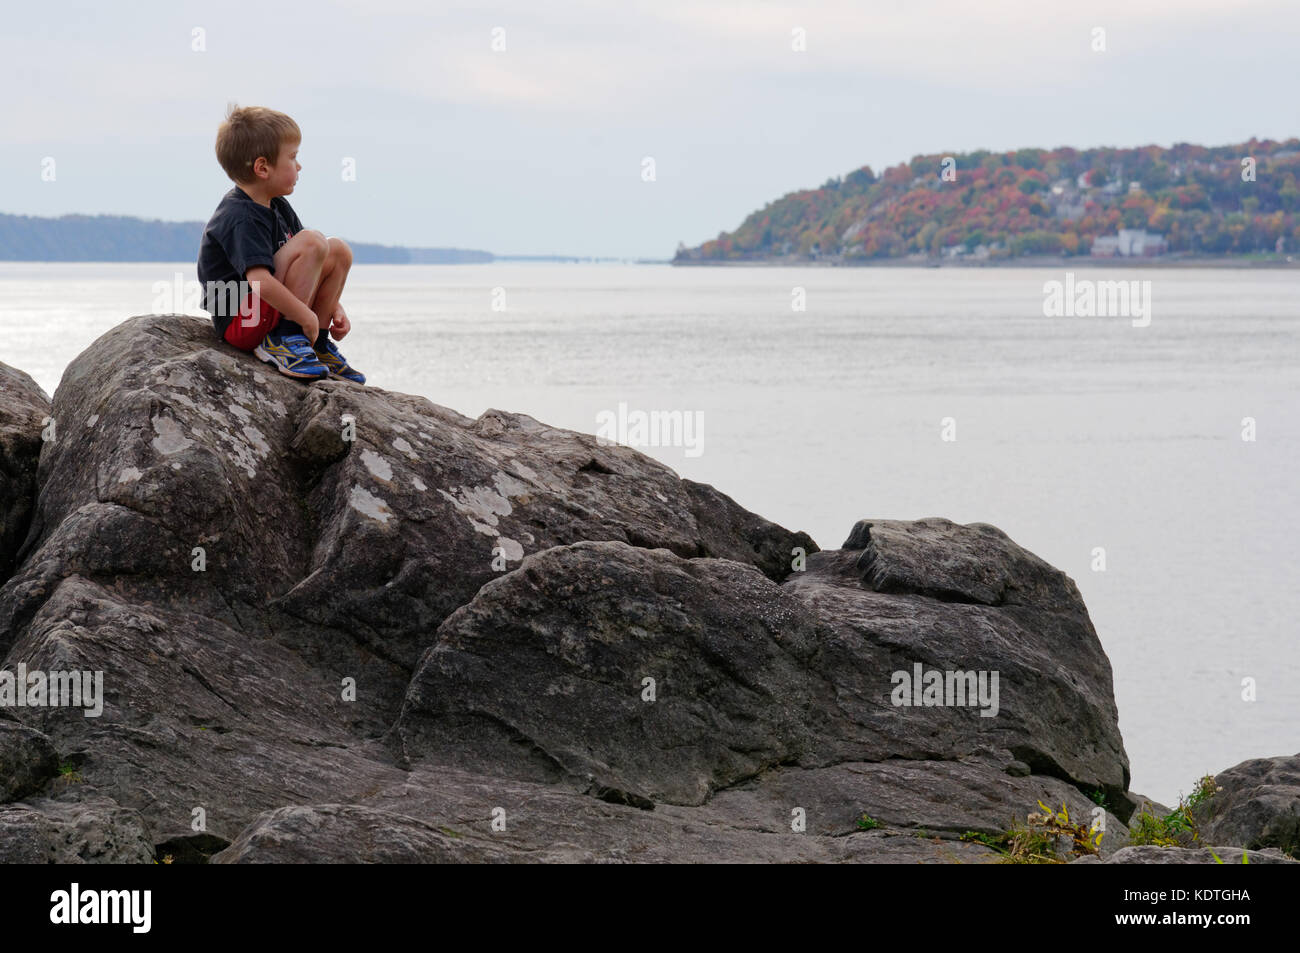 A little boy (5 yrs old) sitting alone on rocks by the River St Lawrence at Cap Rouge near Quebec City, looking thoughtful Stock Photo